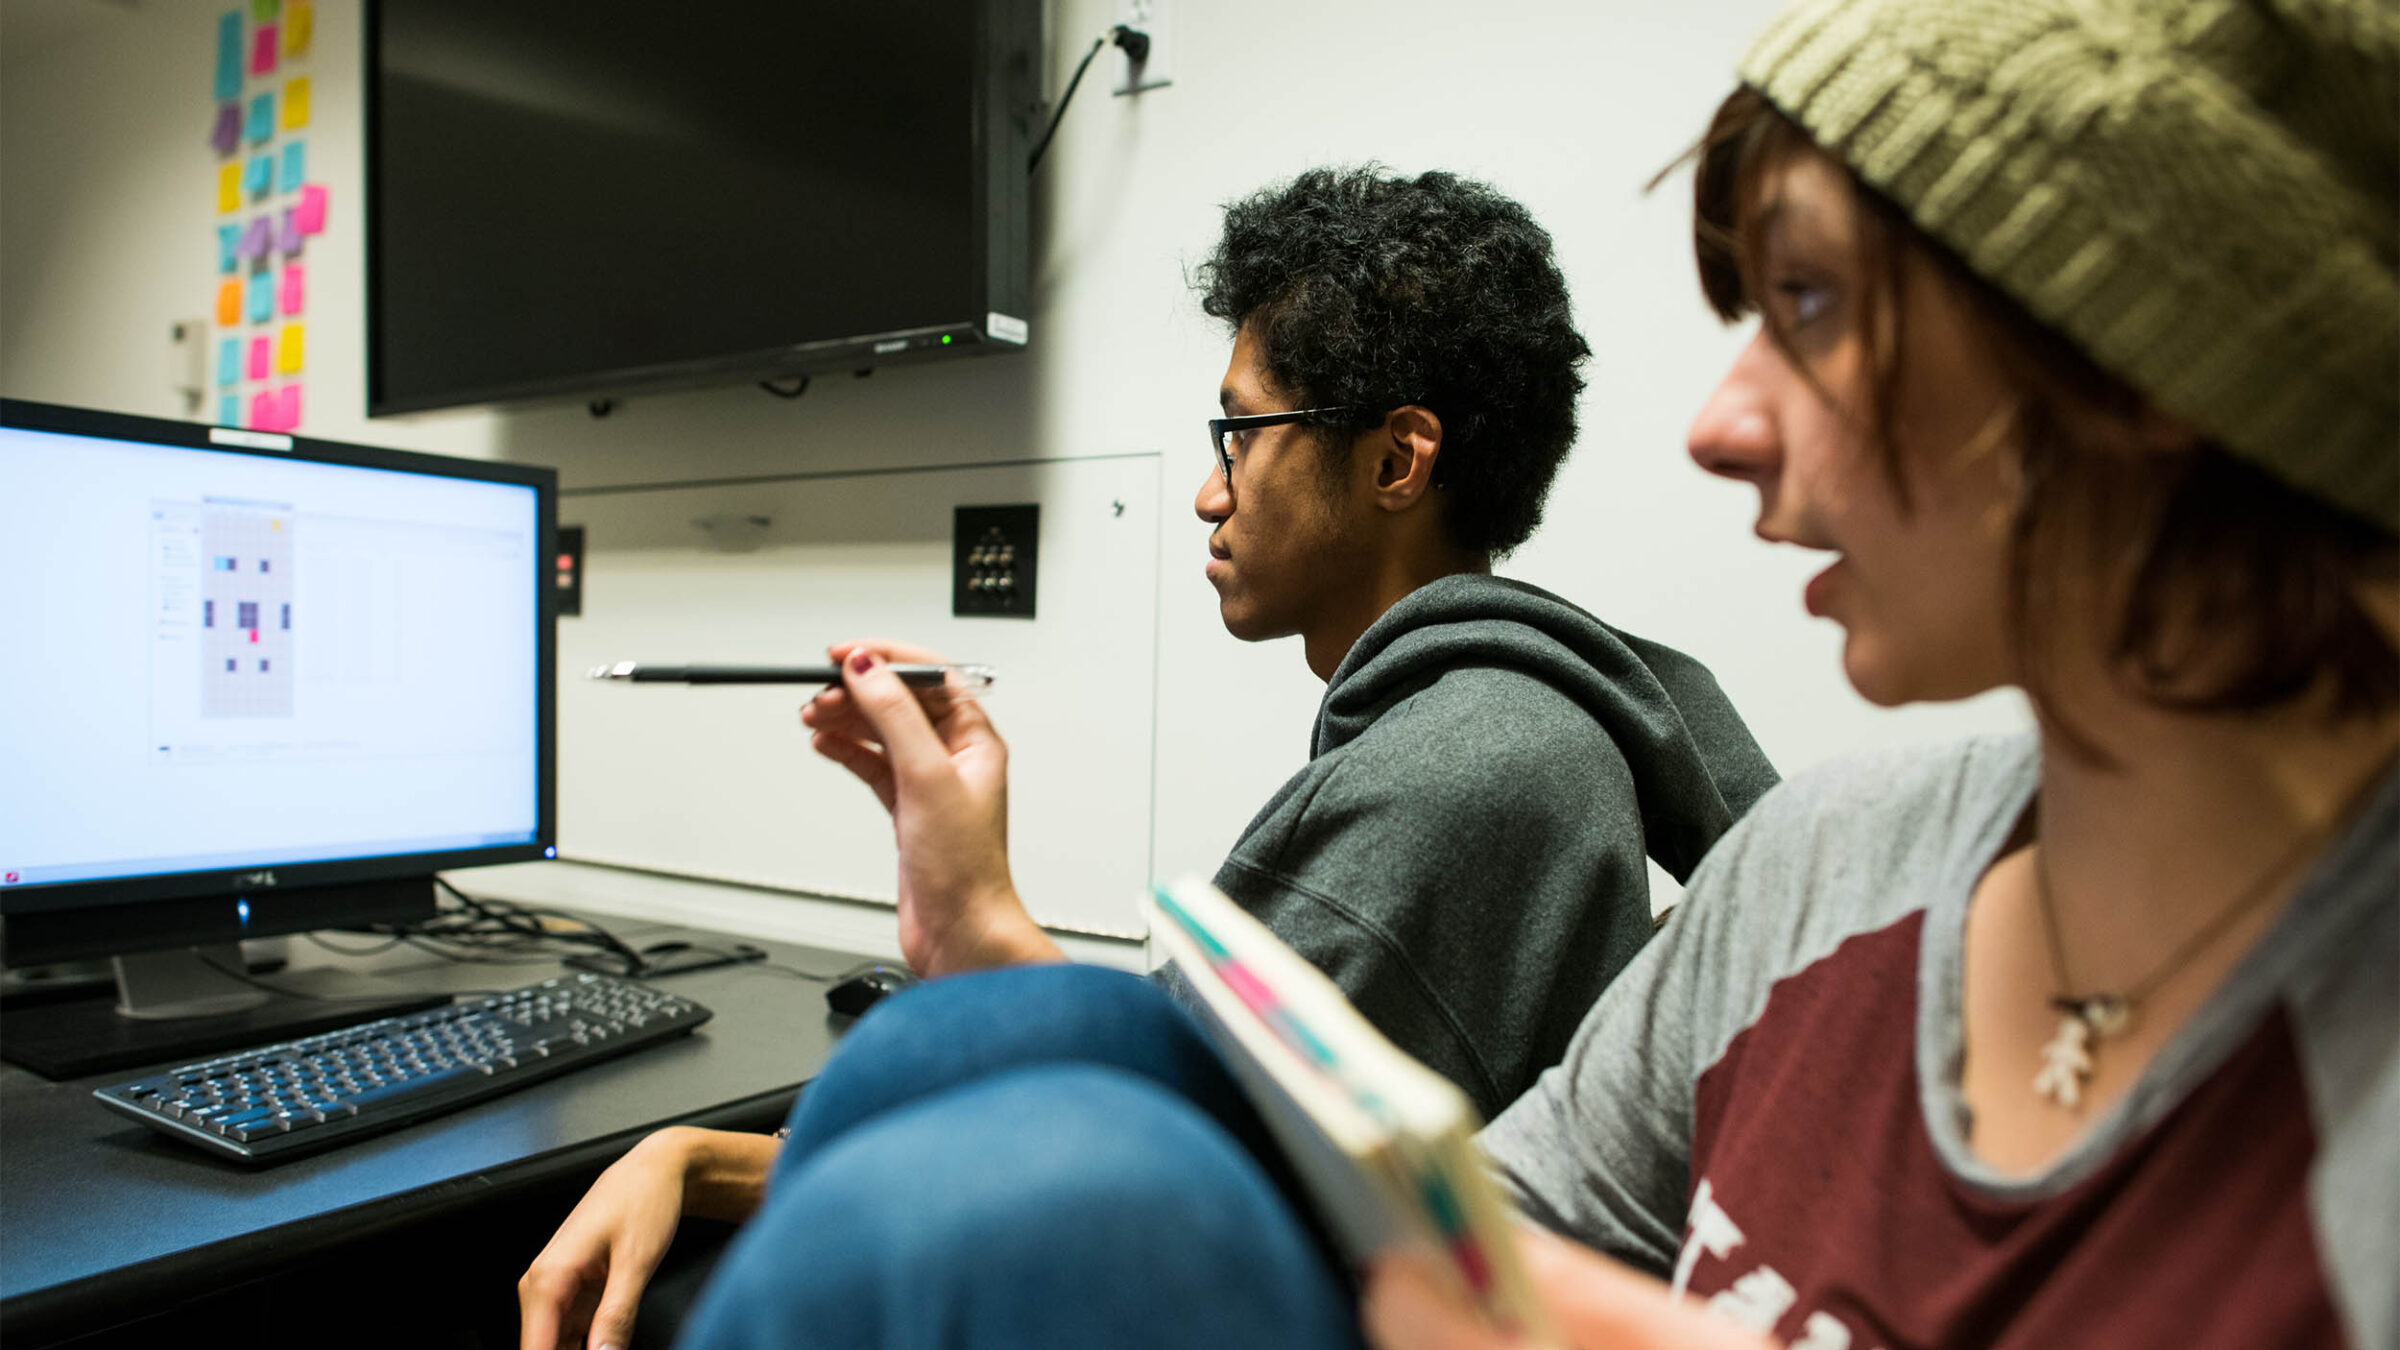 two students collaborating on a game design project in front of a computer screen